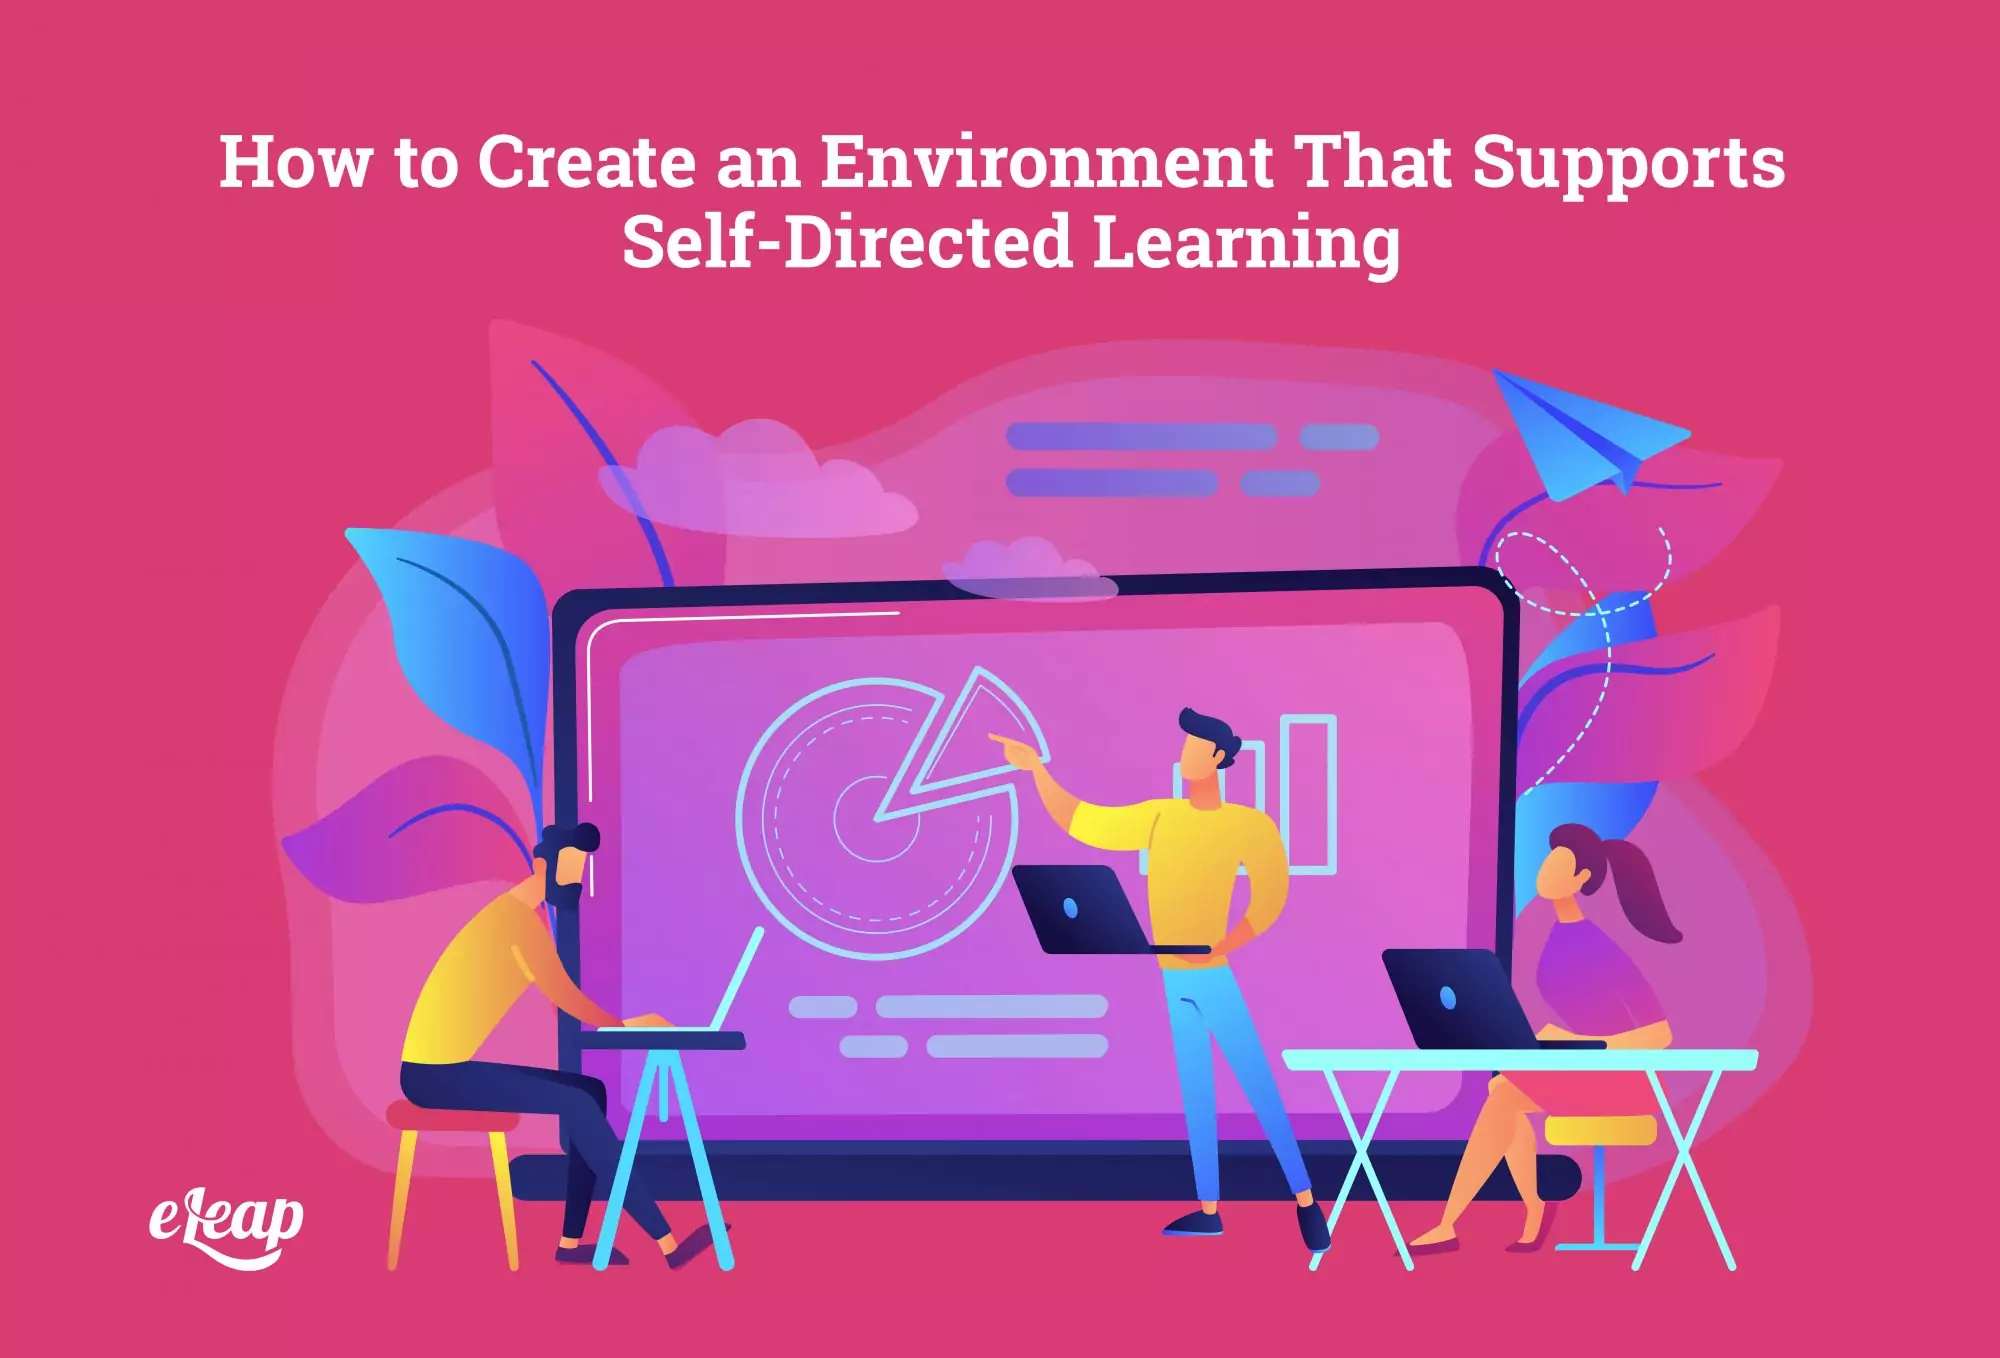 How to Create an Environment That Supports Self-Directed Learning